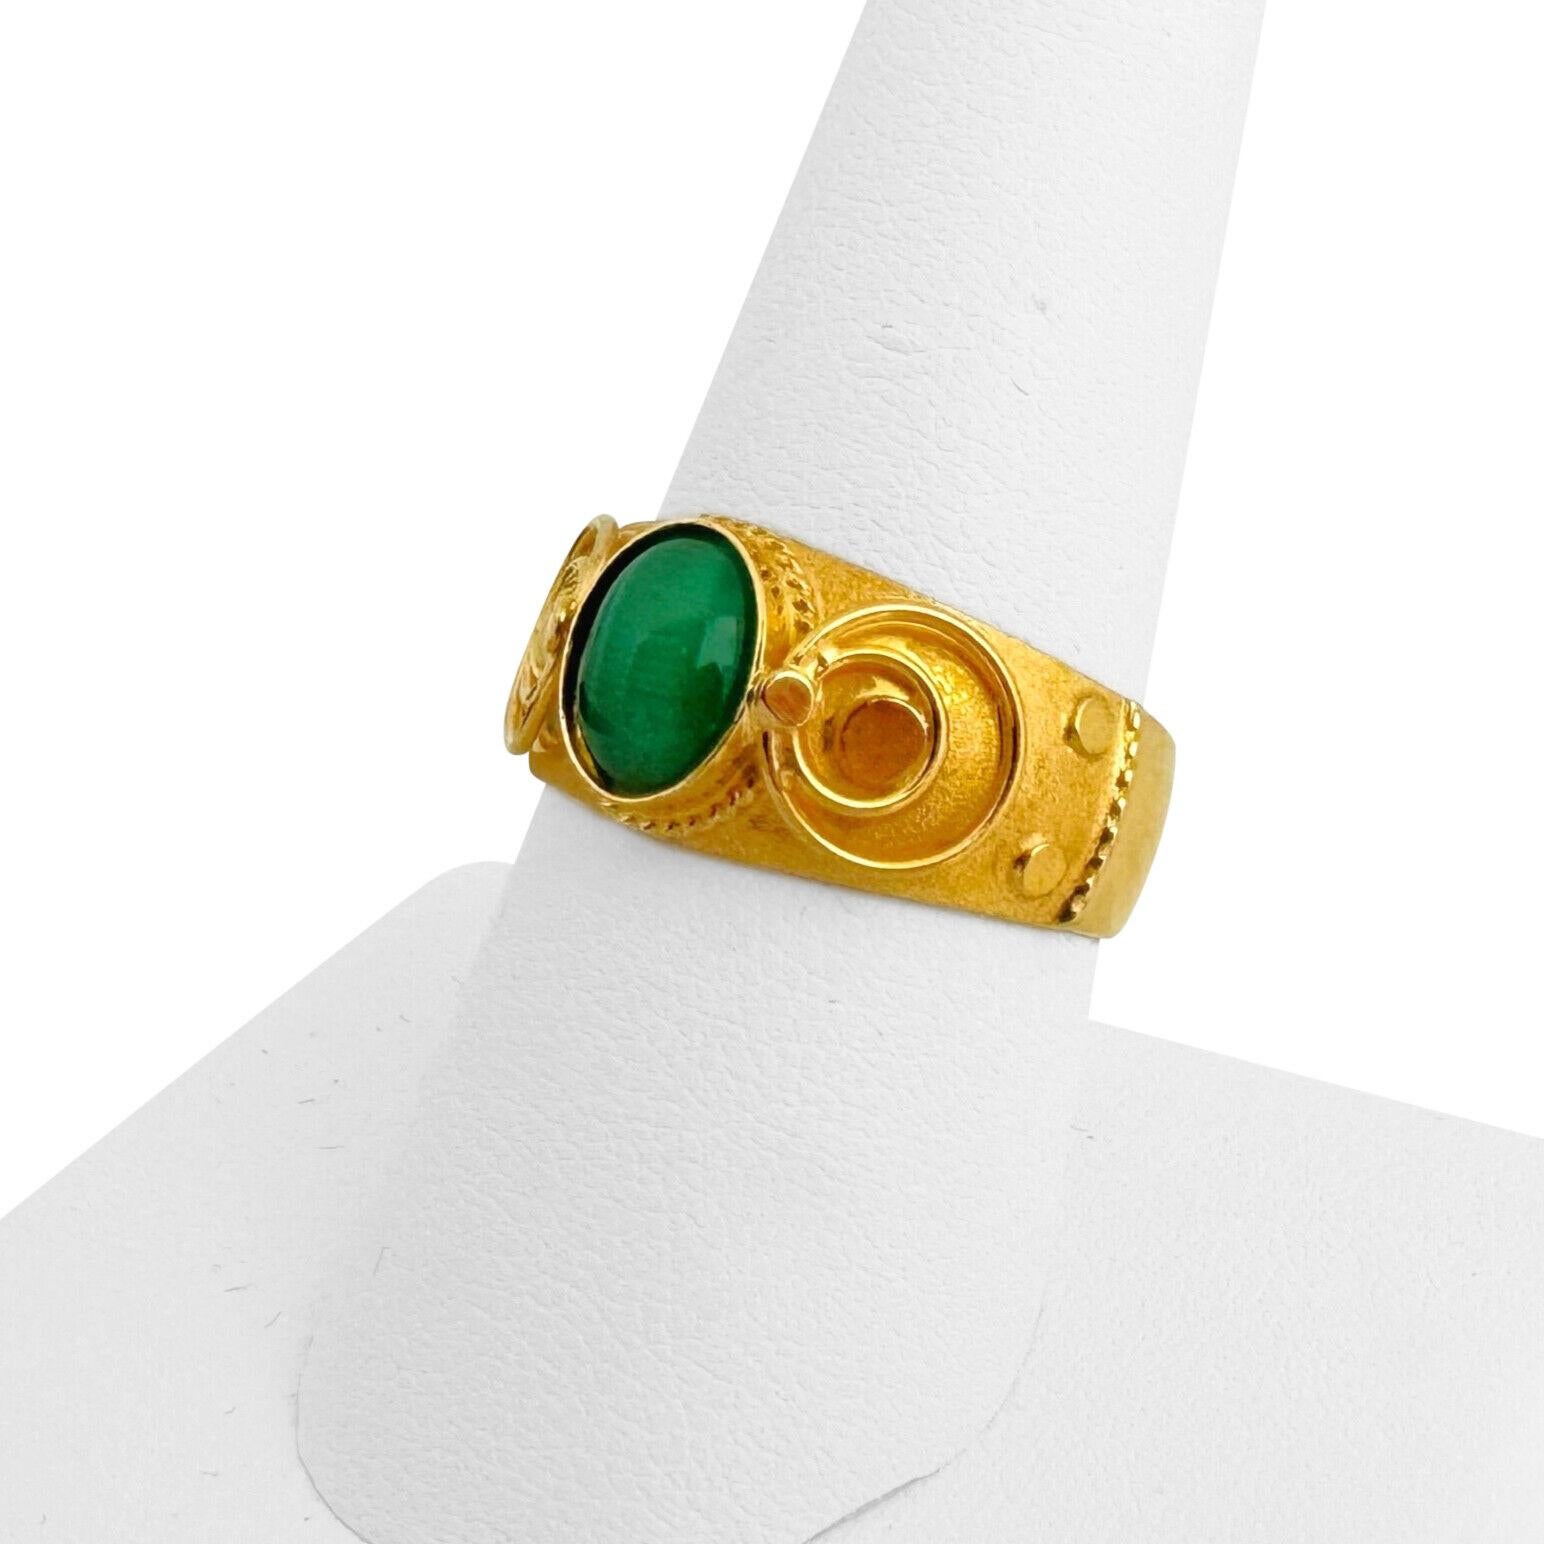 21k Yellow Gold and Green Tiger's Eye 3.6g Fancy Band Ring Size 8.5

Condition:  Excellent Condition, Professionally Cleaned and Polished
Metal:  21k Gold (Marked, and Professionally Tested)
Weight:  3.6g
Gemstone:  Oval Cabochon Green Tiger's